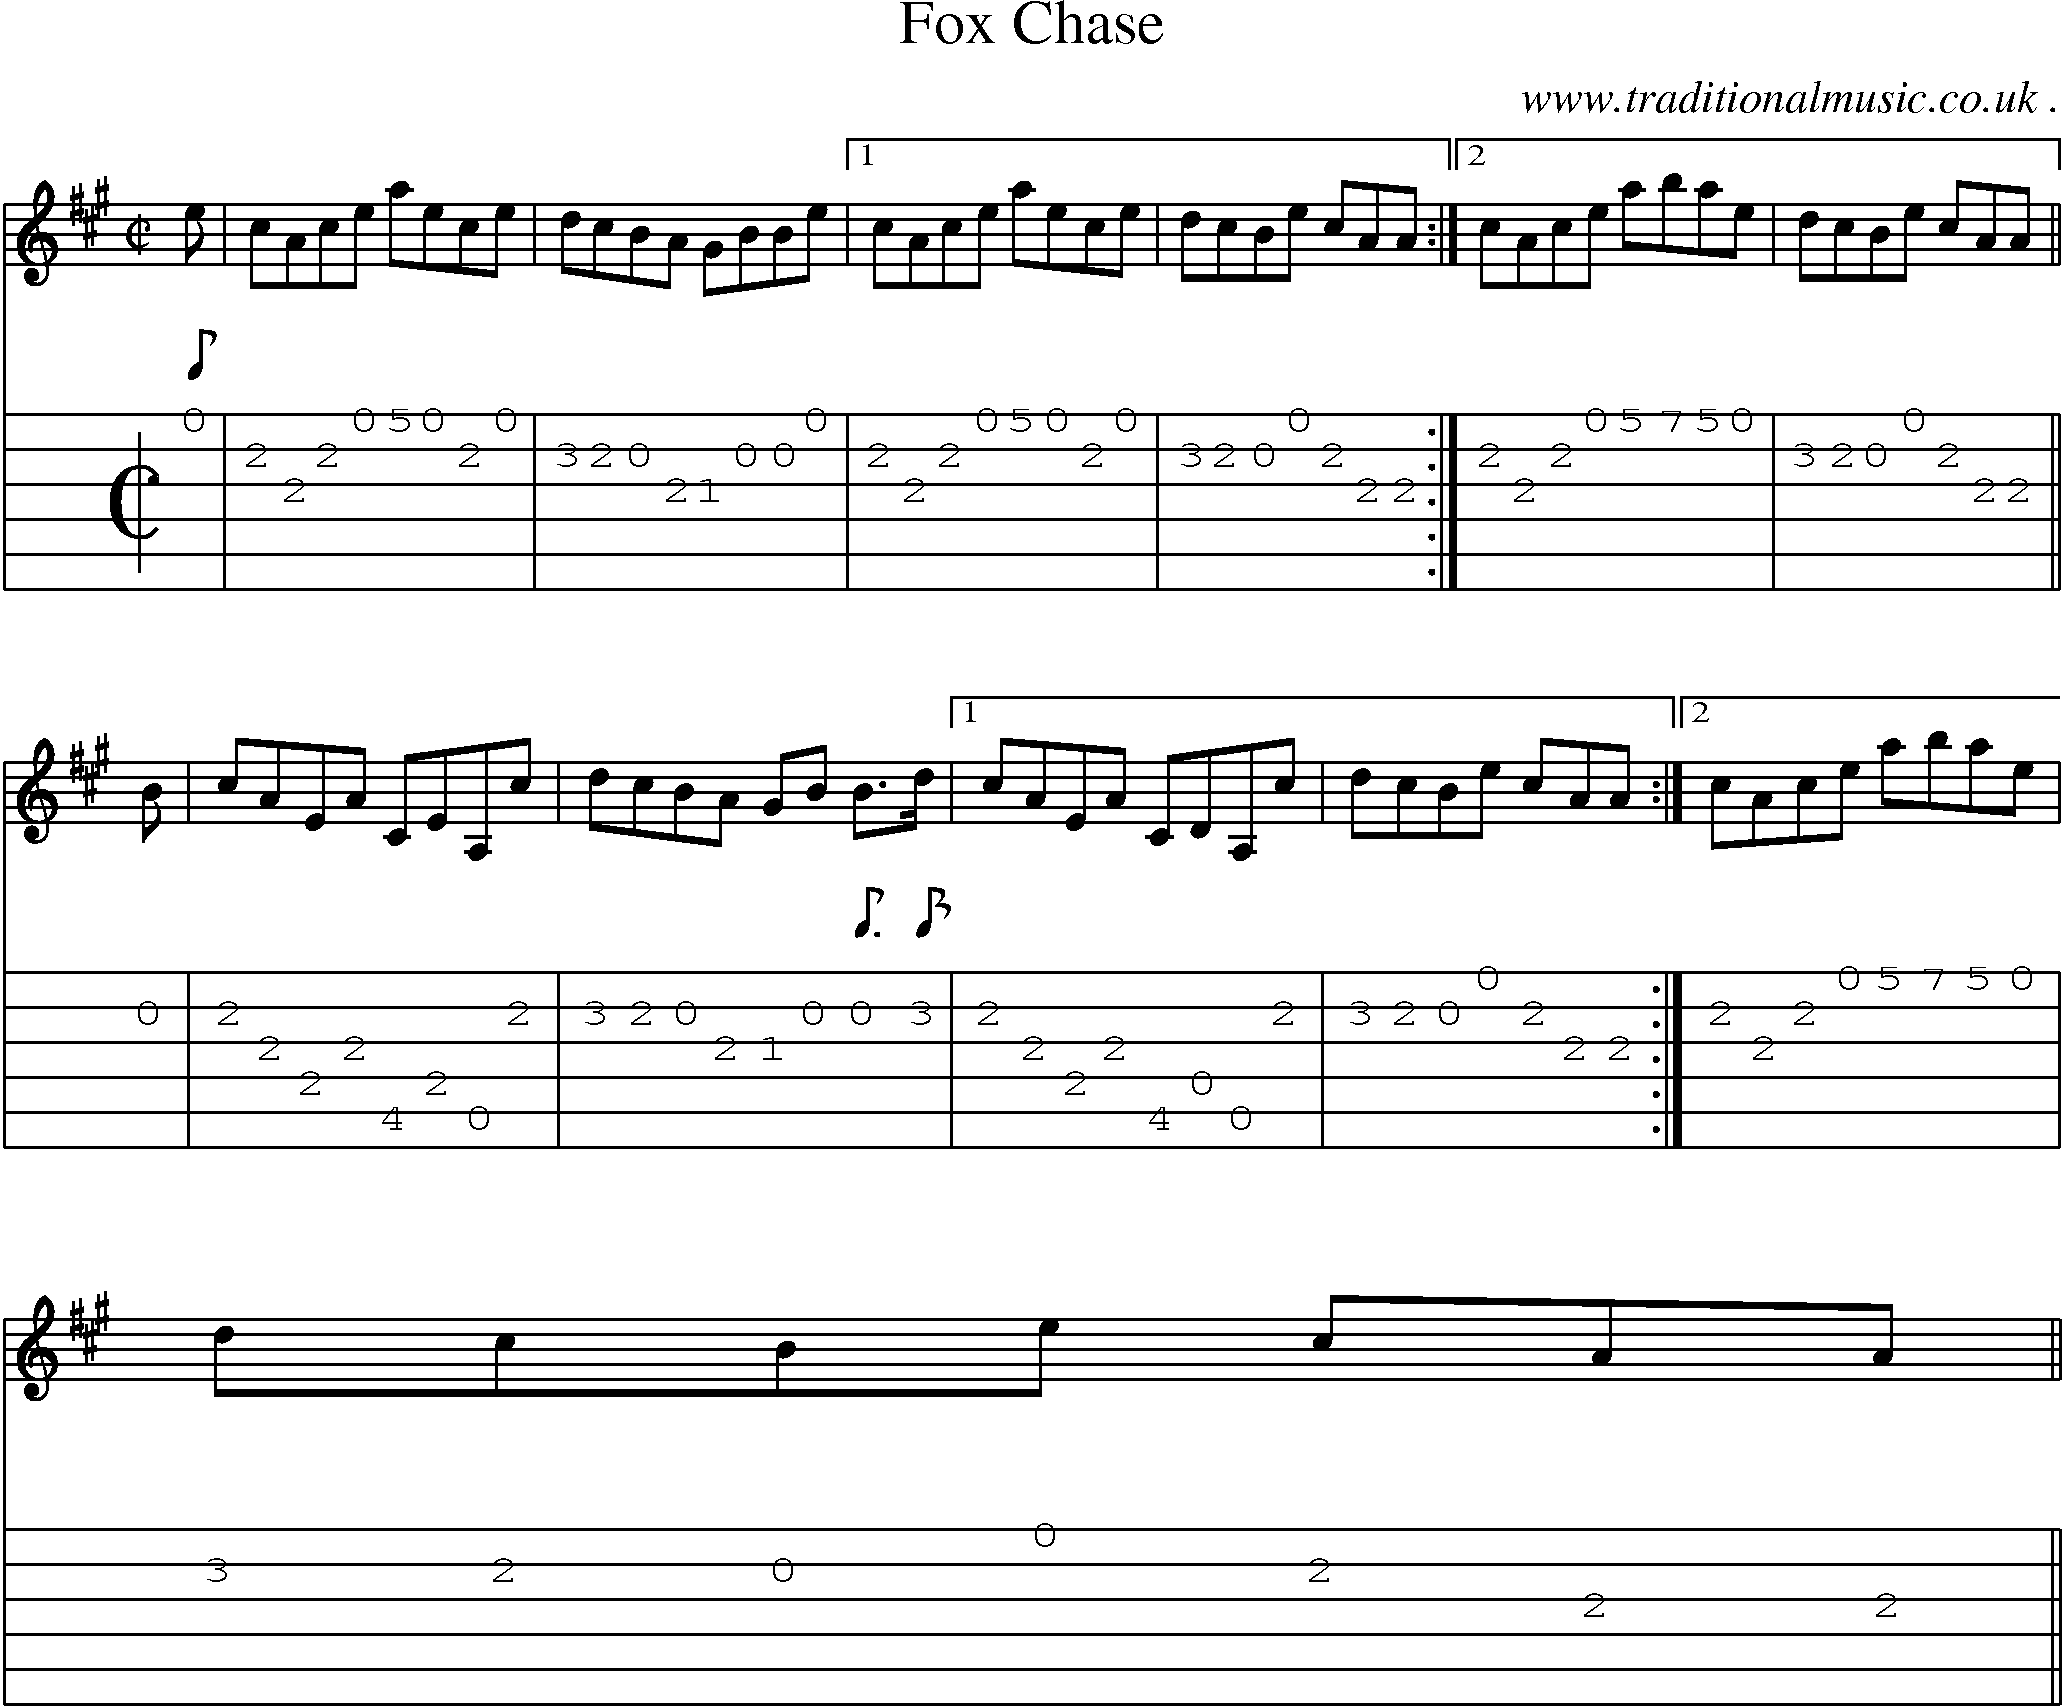 Sheet-music  score, Chords and Guitar Tabs for Fox Chase